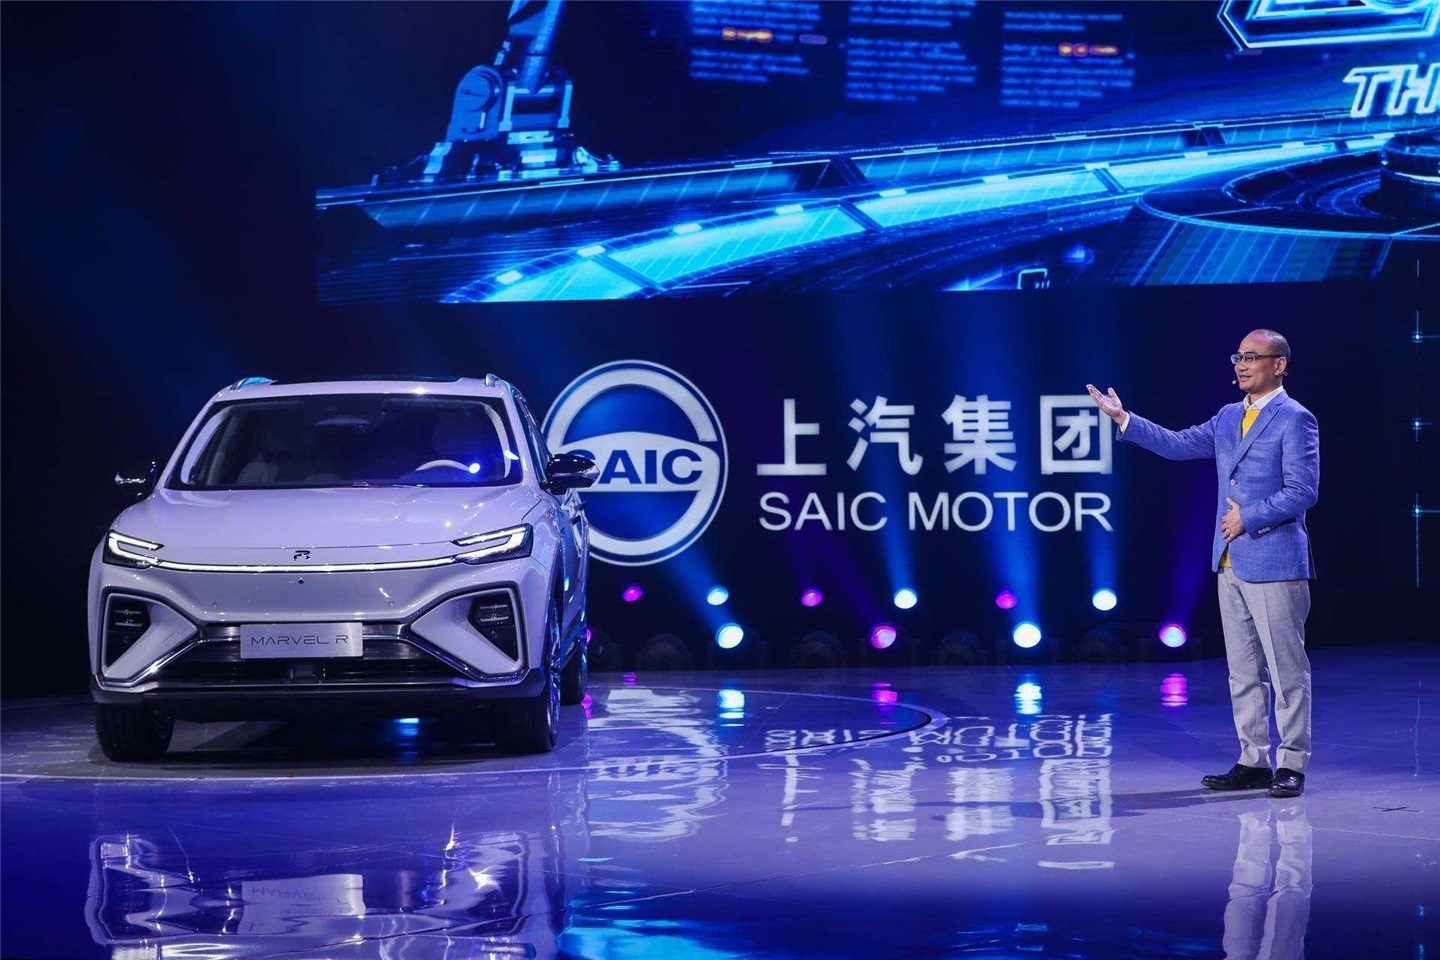 SAIC launches MARVEL R, first electric vehicle with 5G connectivity-CnEVPost